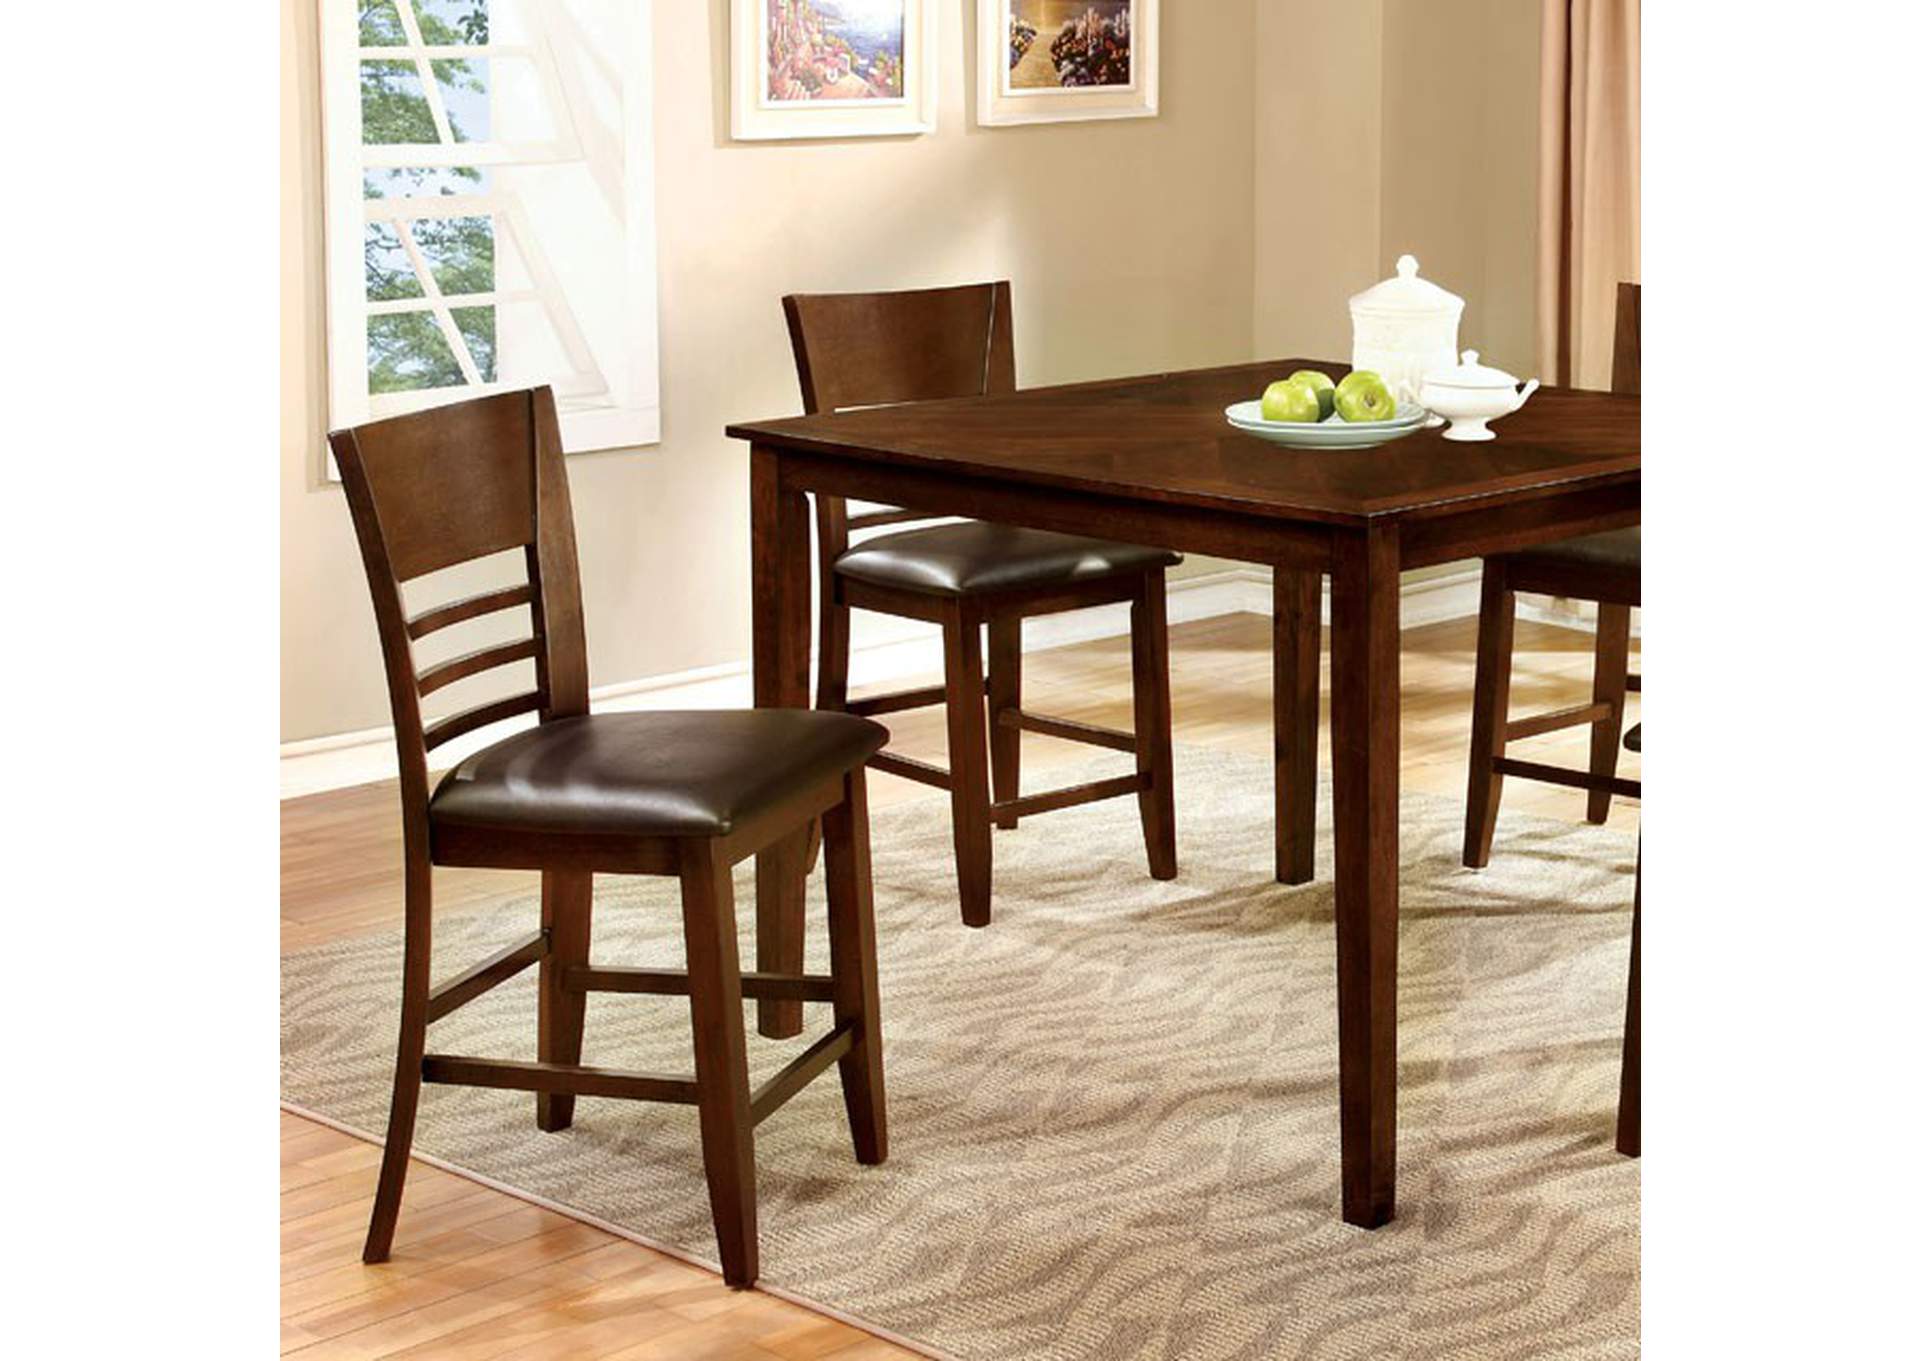 Hillsview Brown Cherry Dining Table Set,Furniture of America